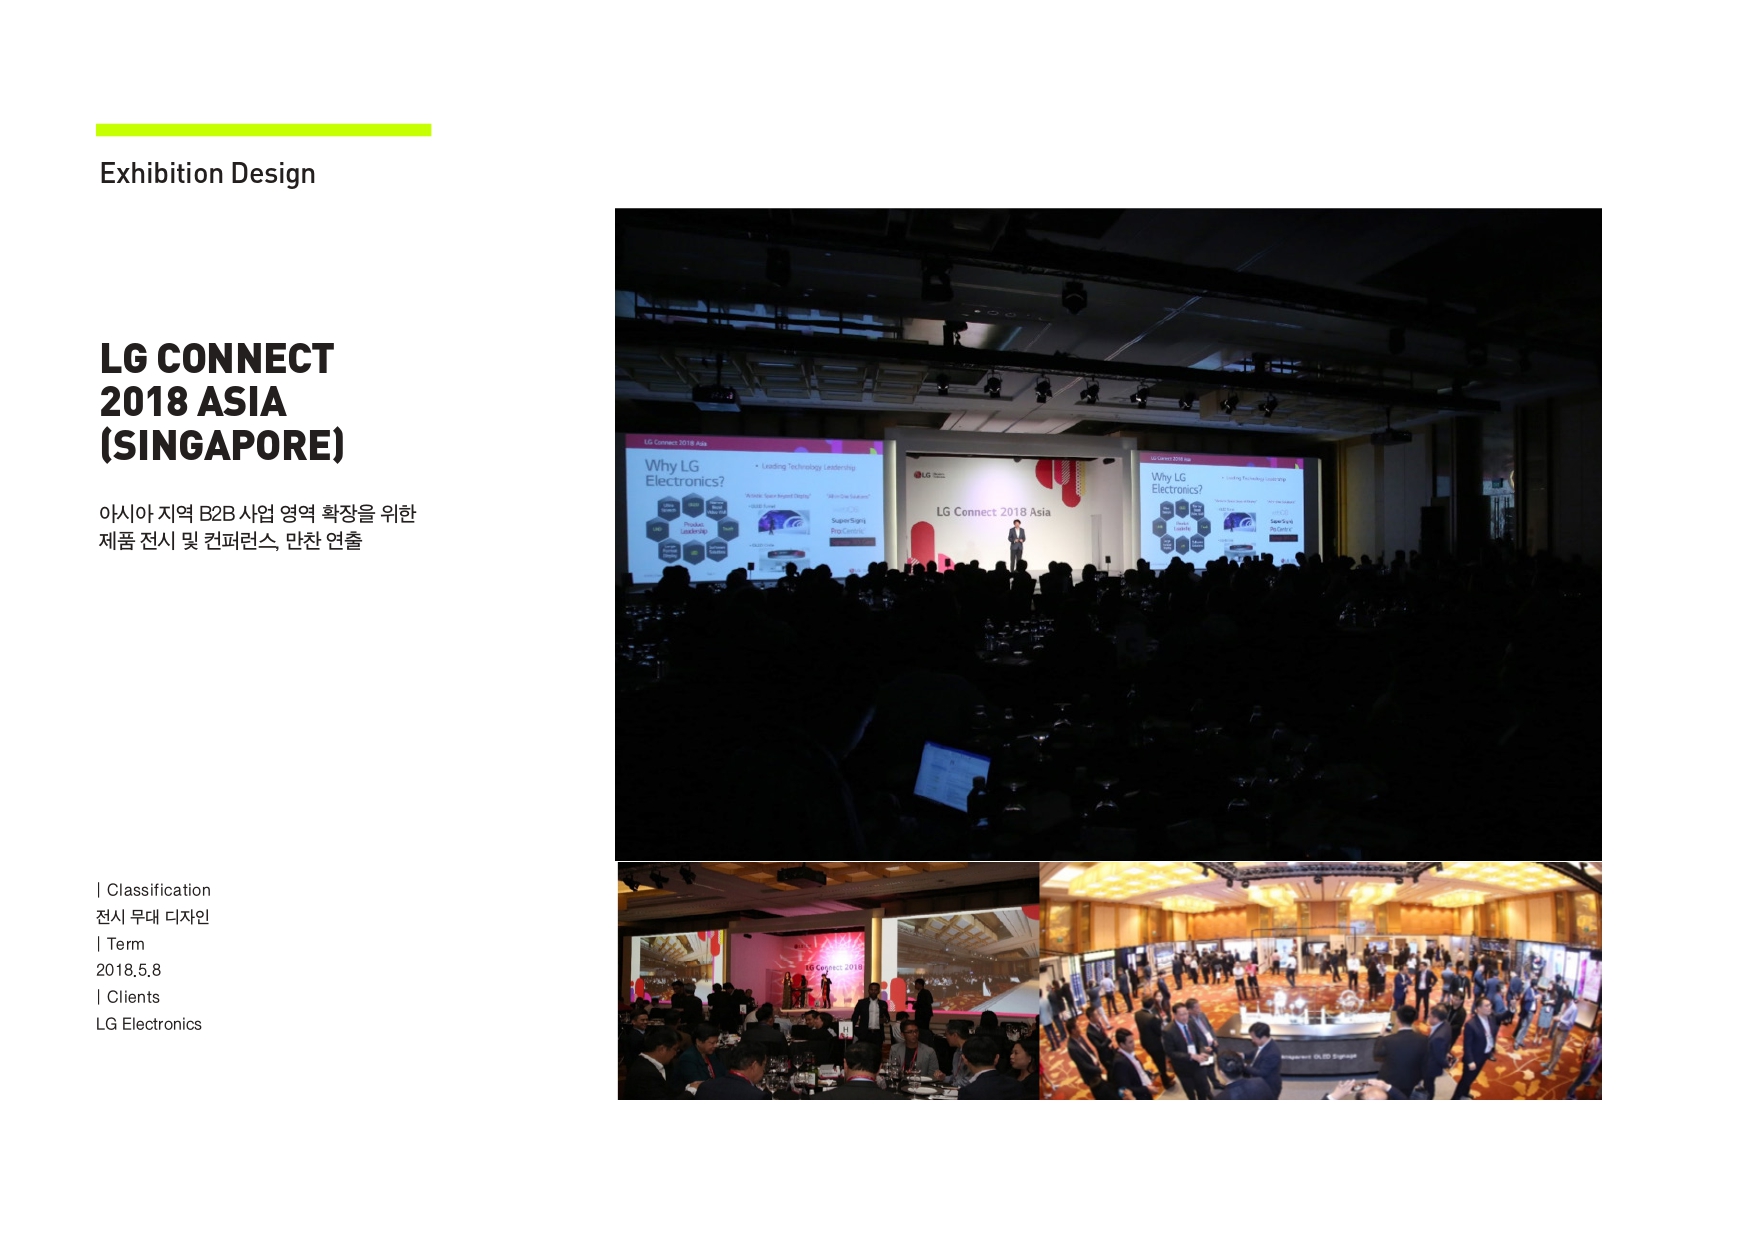 LG CONNECT 2018 ASIA.jpg